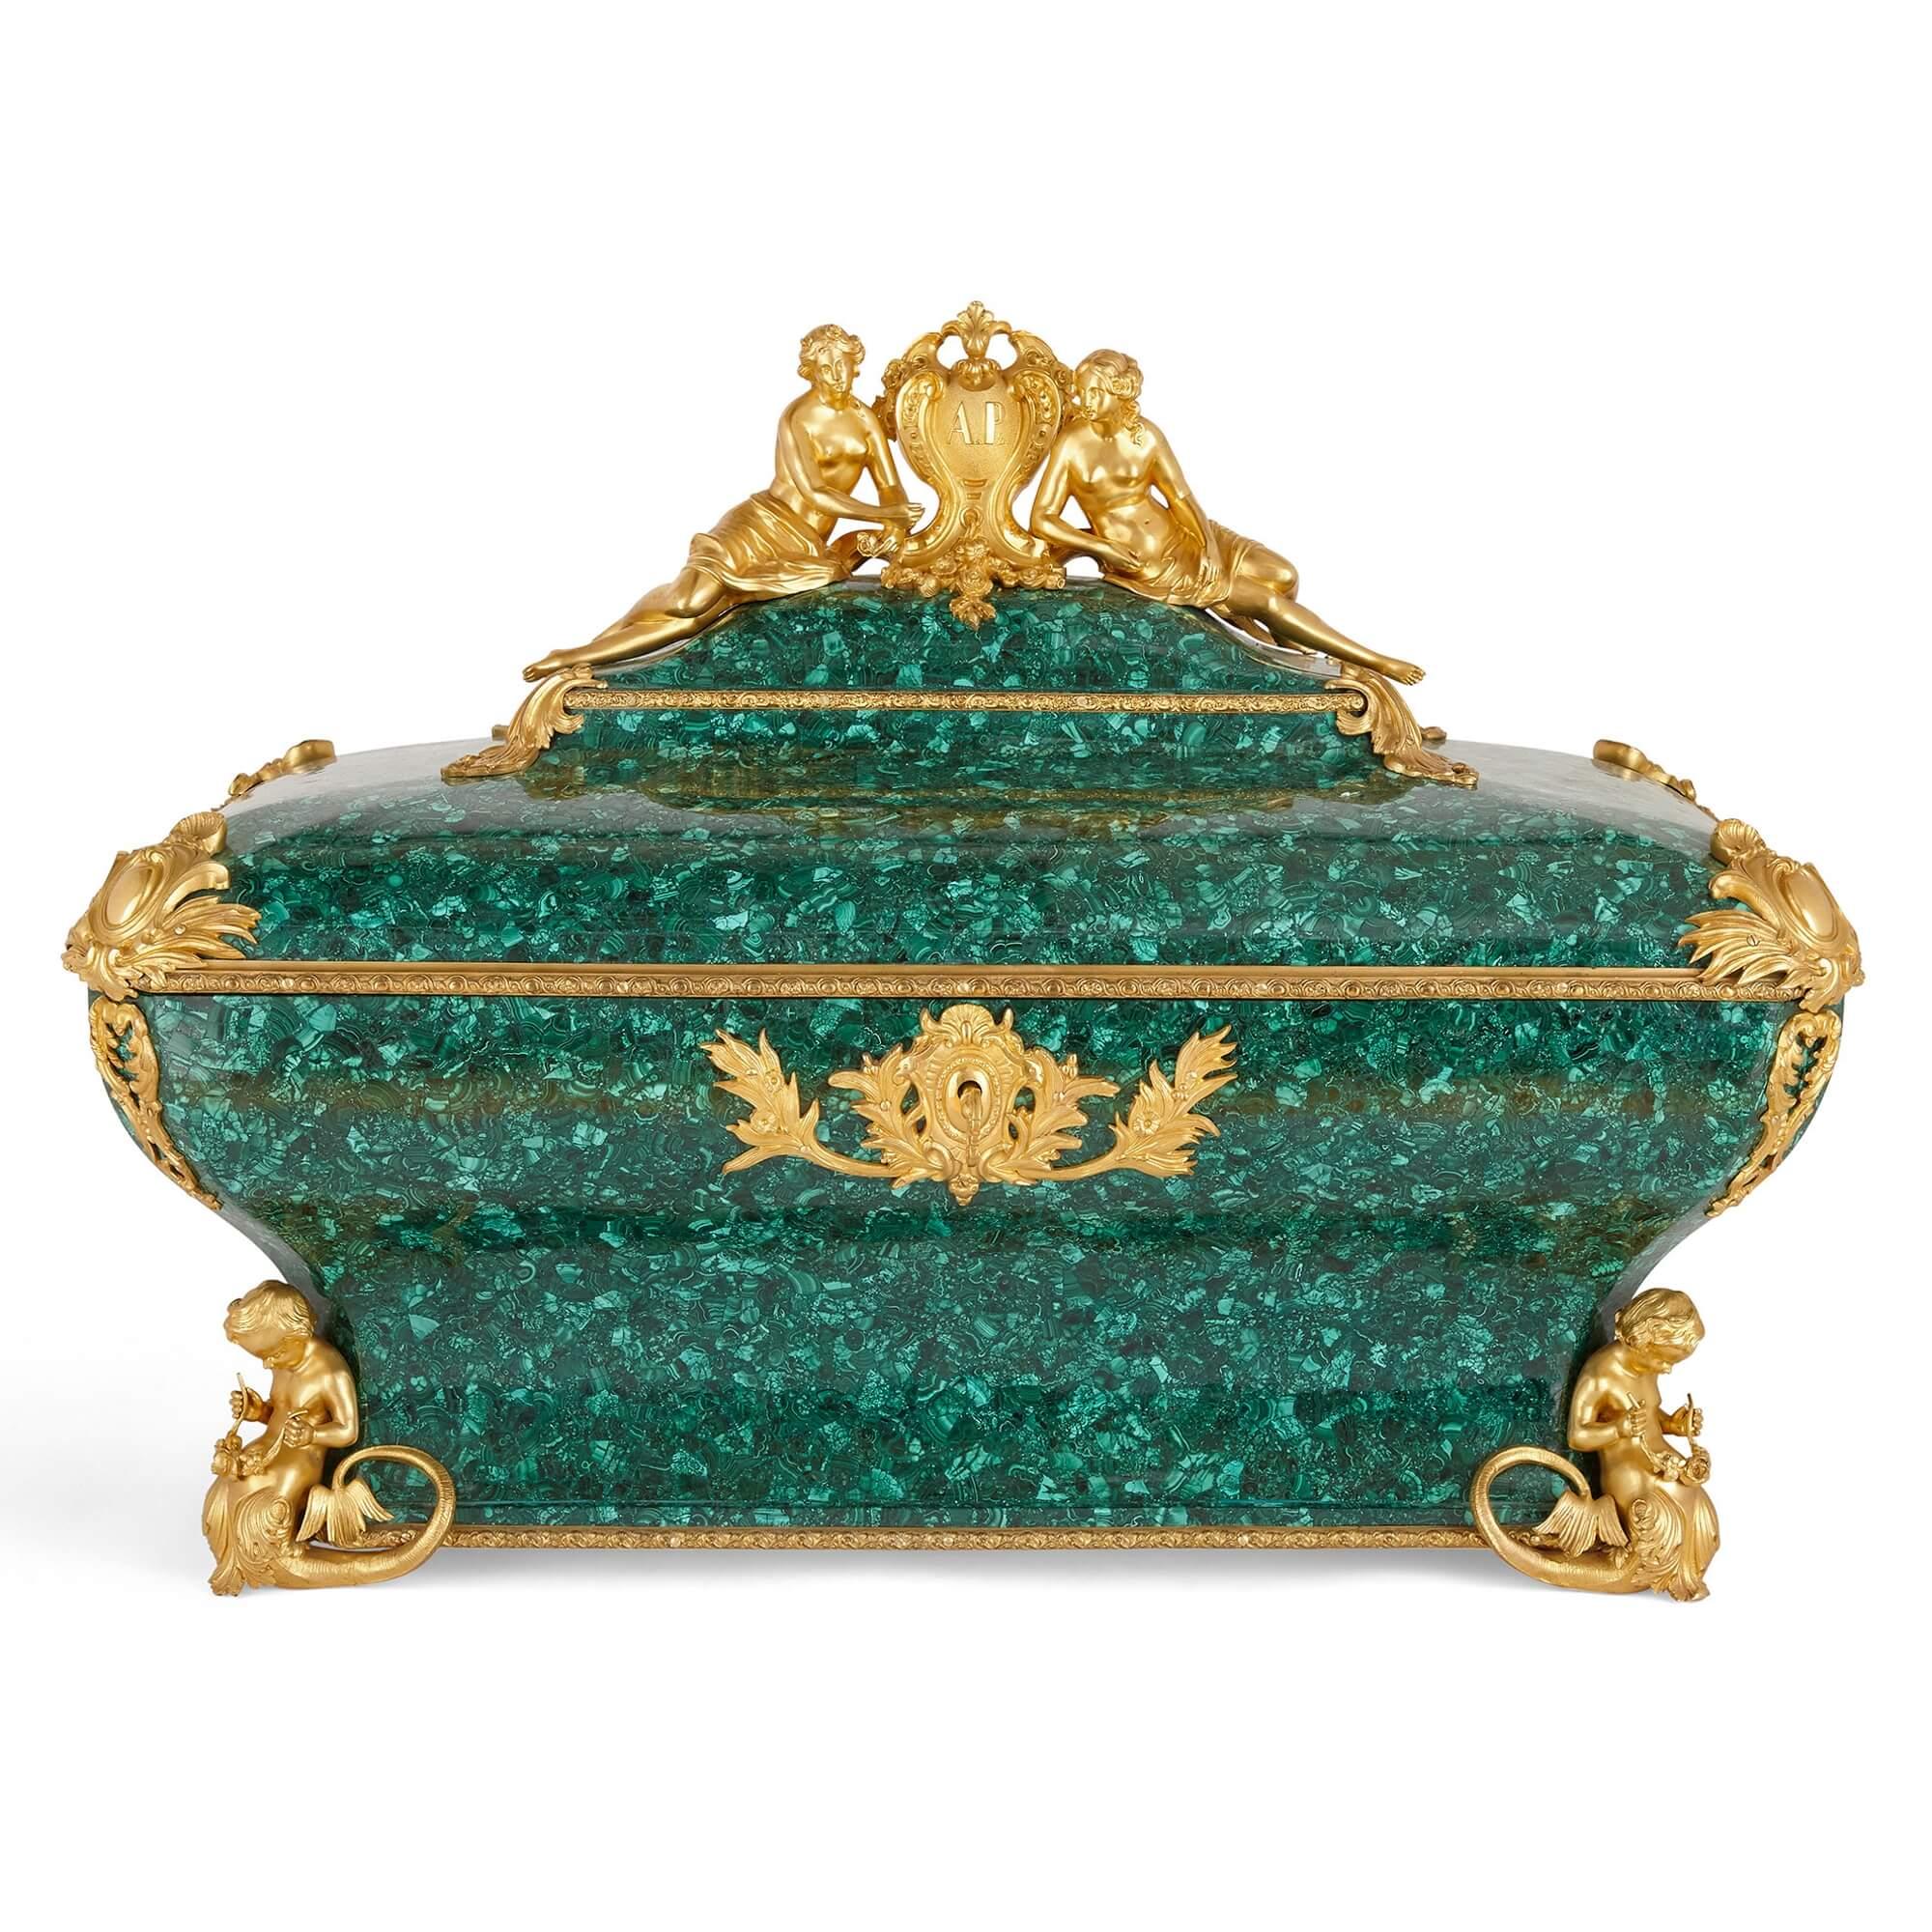 Antique gilt bronze and malachite casket by Monbro Fils Ainé
French, mid 19th Century
Measures: Height 68cm, width 92cm, depth 52cm

This marriage casket is a wonderful piece of nineteenth century French design. The casket is wrought from